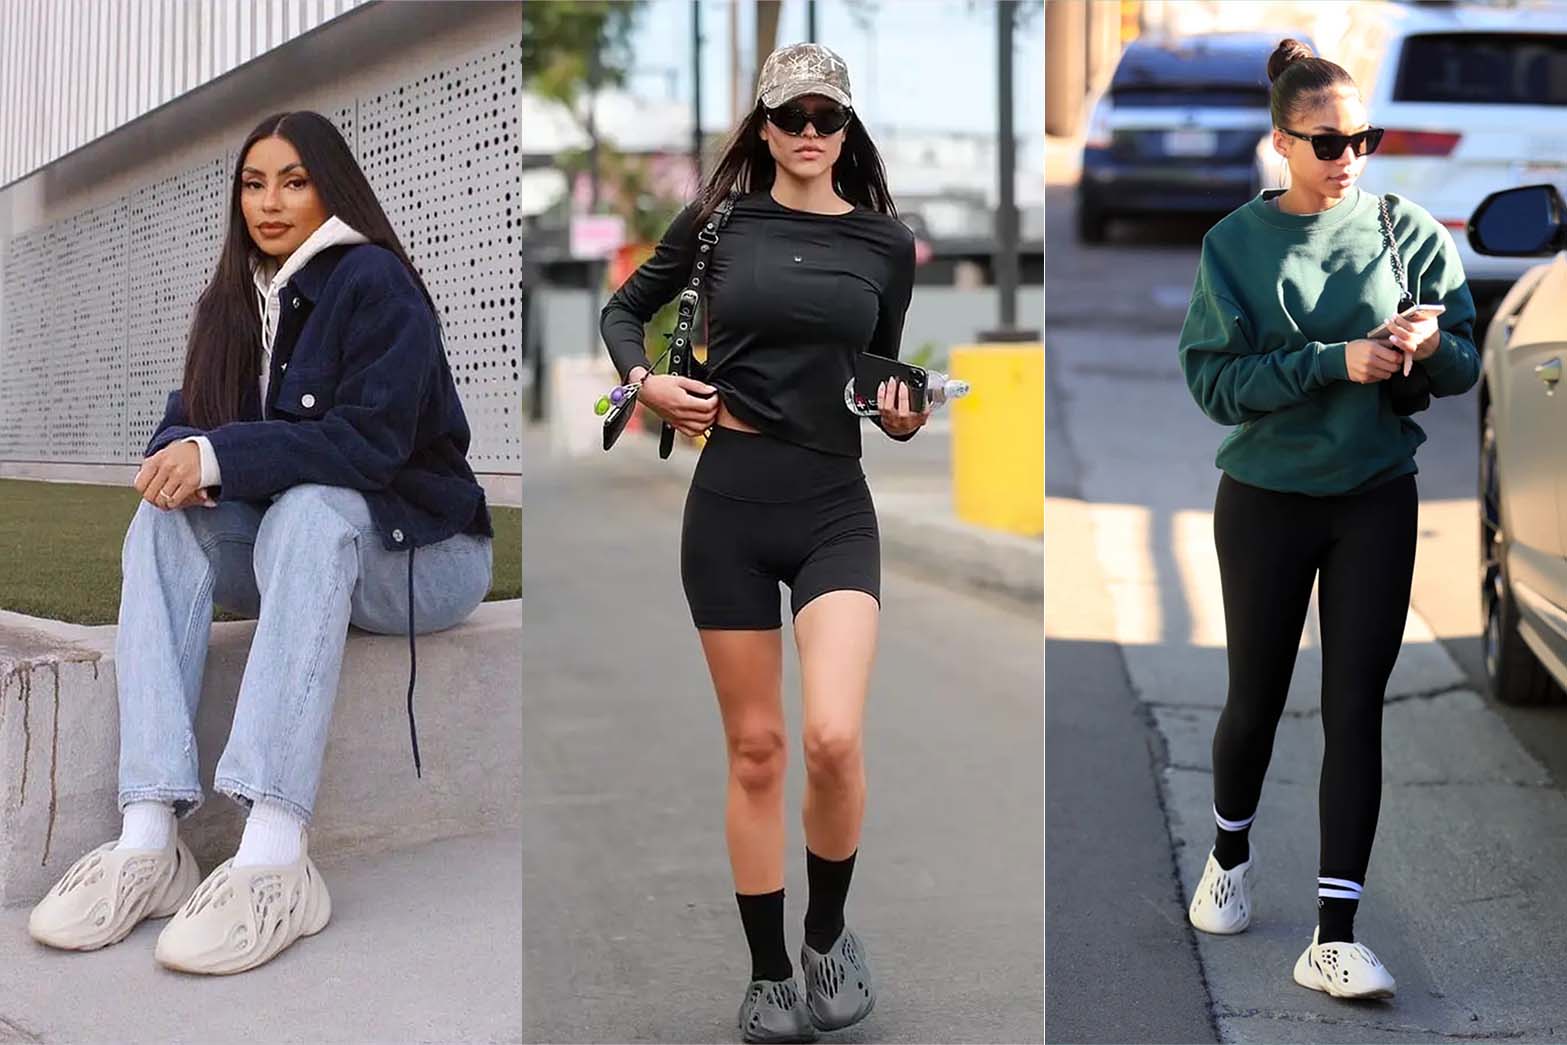 Look: 10 Errands Outfit Ideas To Try, As Seen On Celebrities